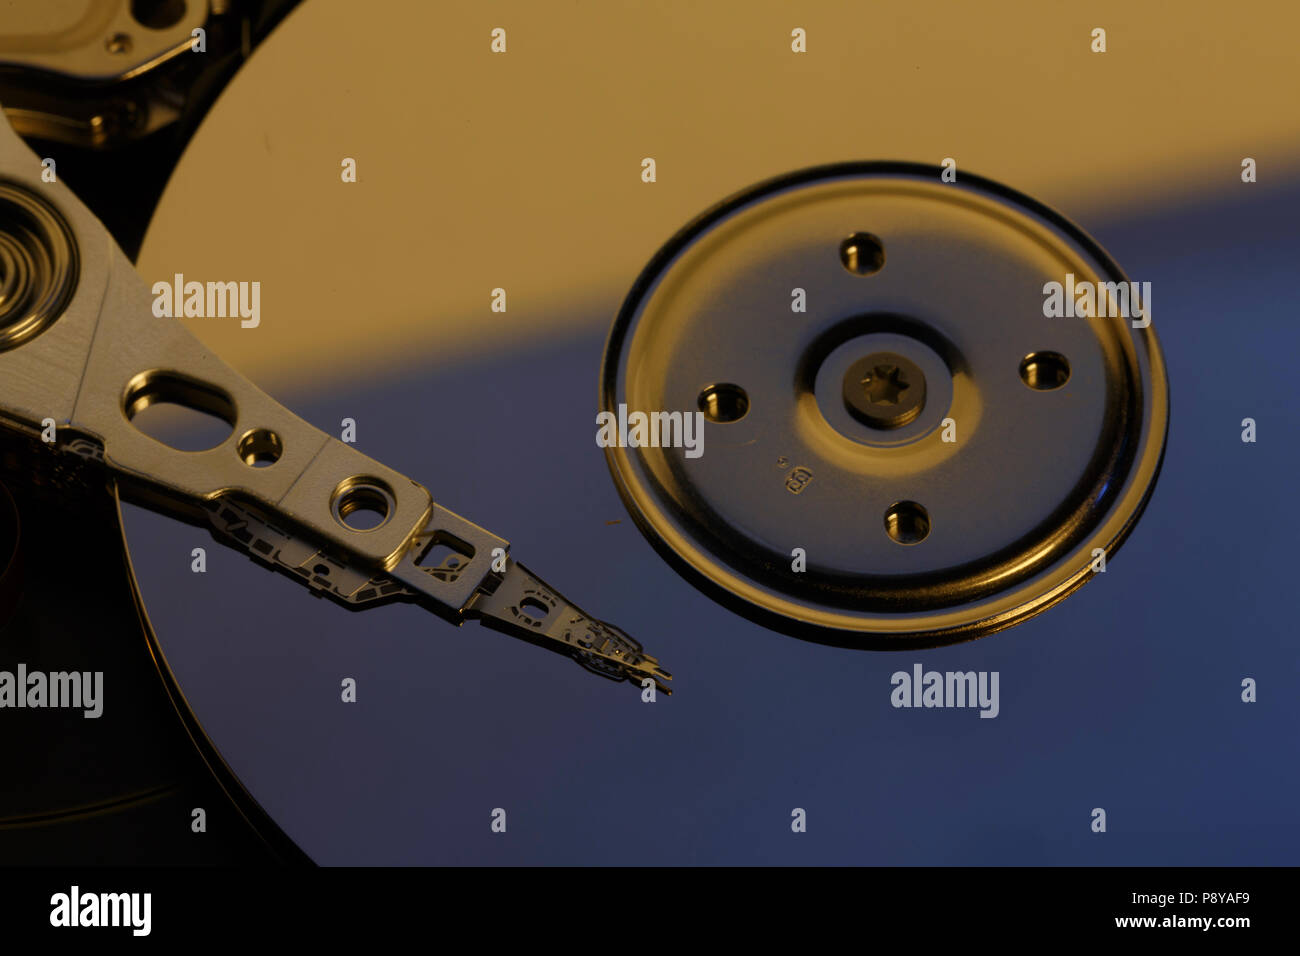 Open hard disk drive (HDD). Stock Photo